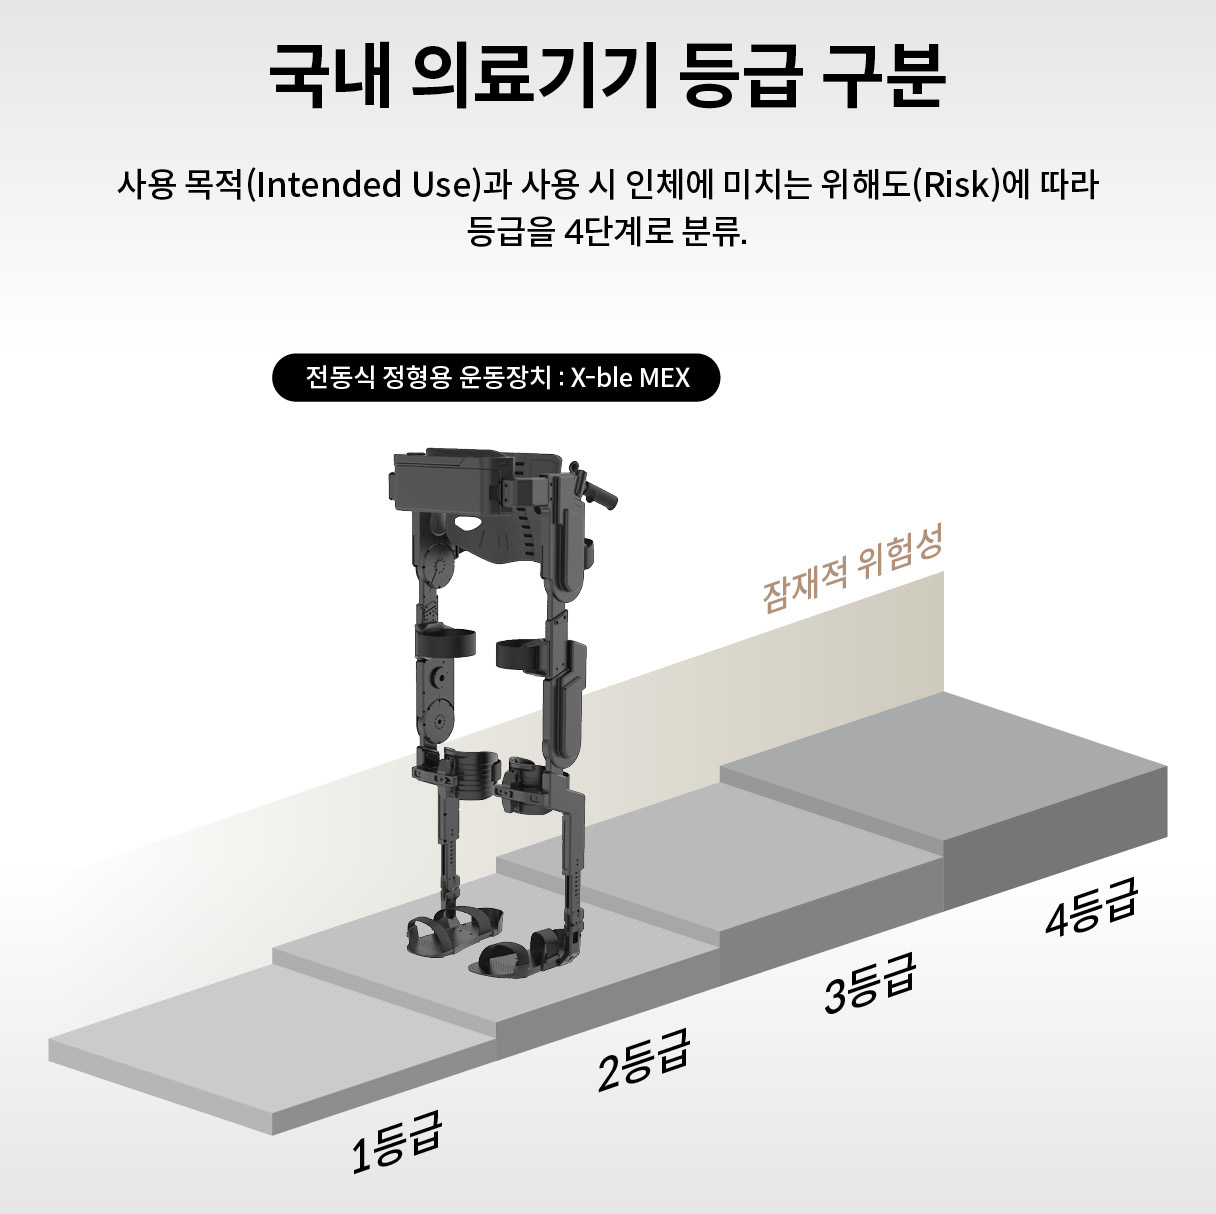 A table explaining The Hyundai Motor Robotics Lab X-ble MEX, which is the class 2 Korean domestic medical device